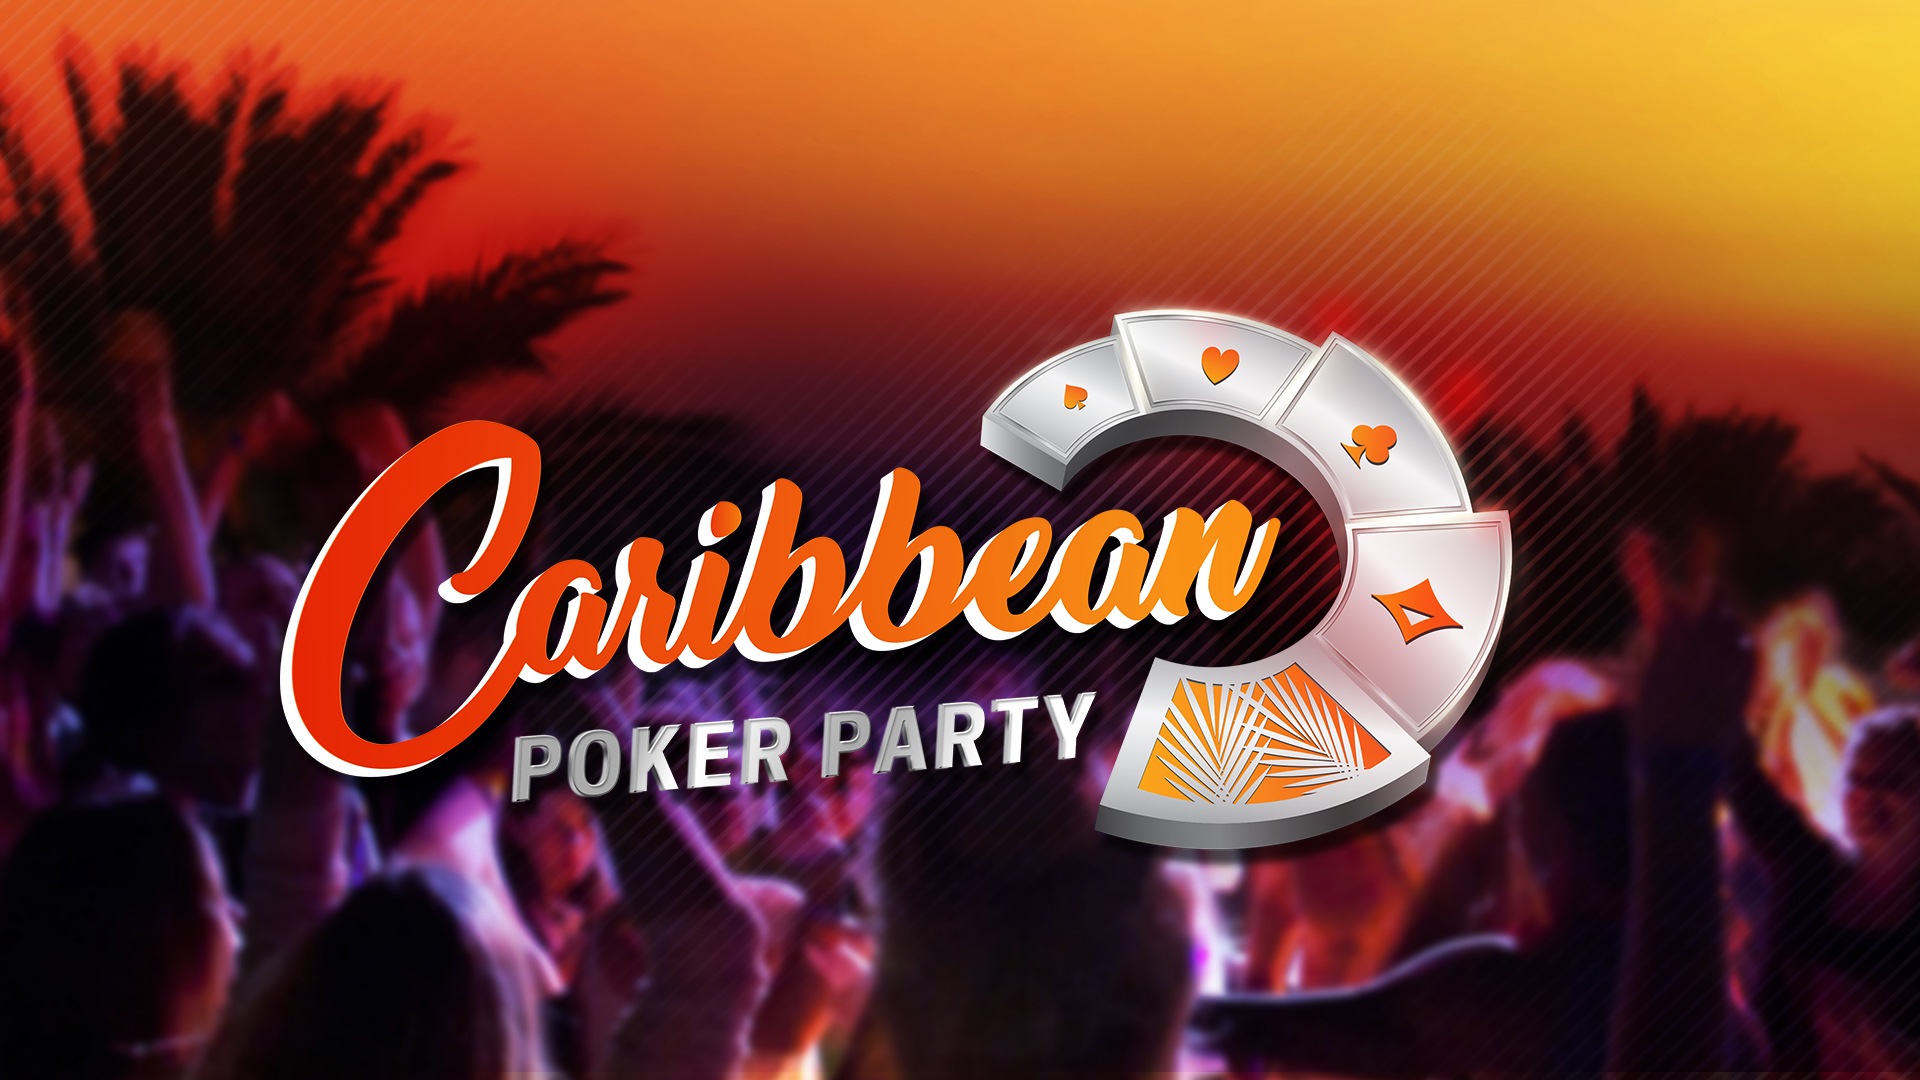 Partypoker Caribbean Poker Party to Challenge PokerStars’ Bahamian Dominance with $22M in Guarantees